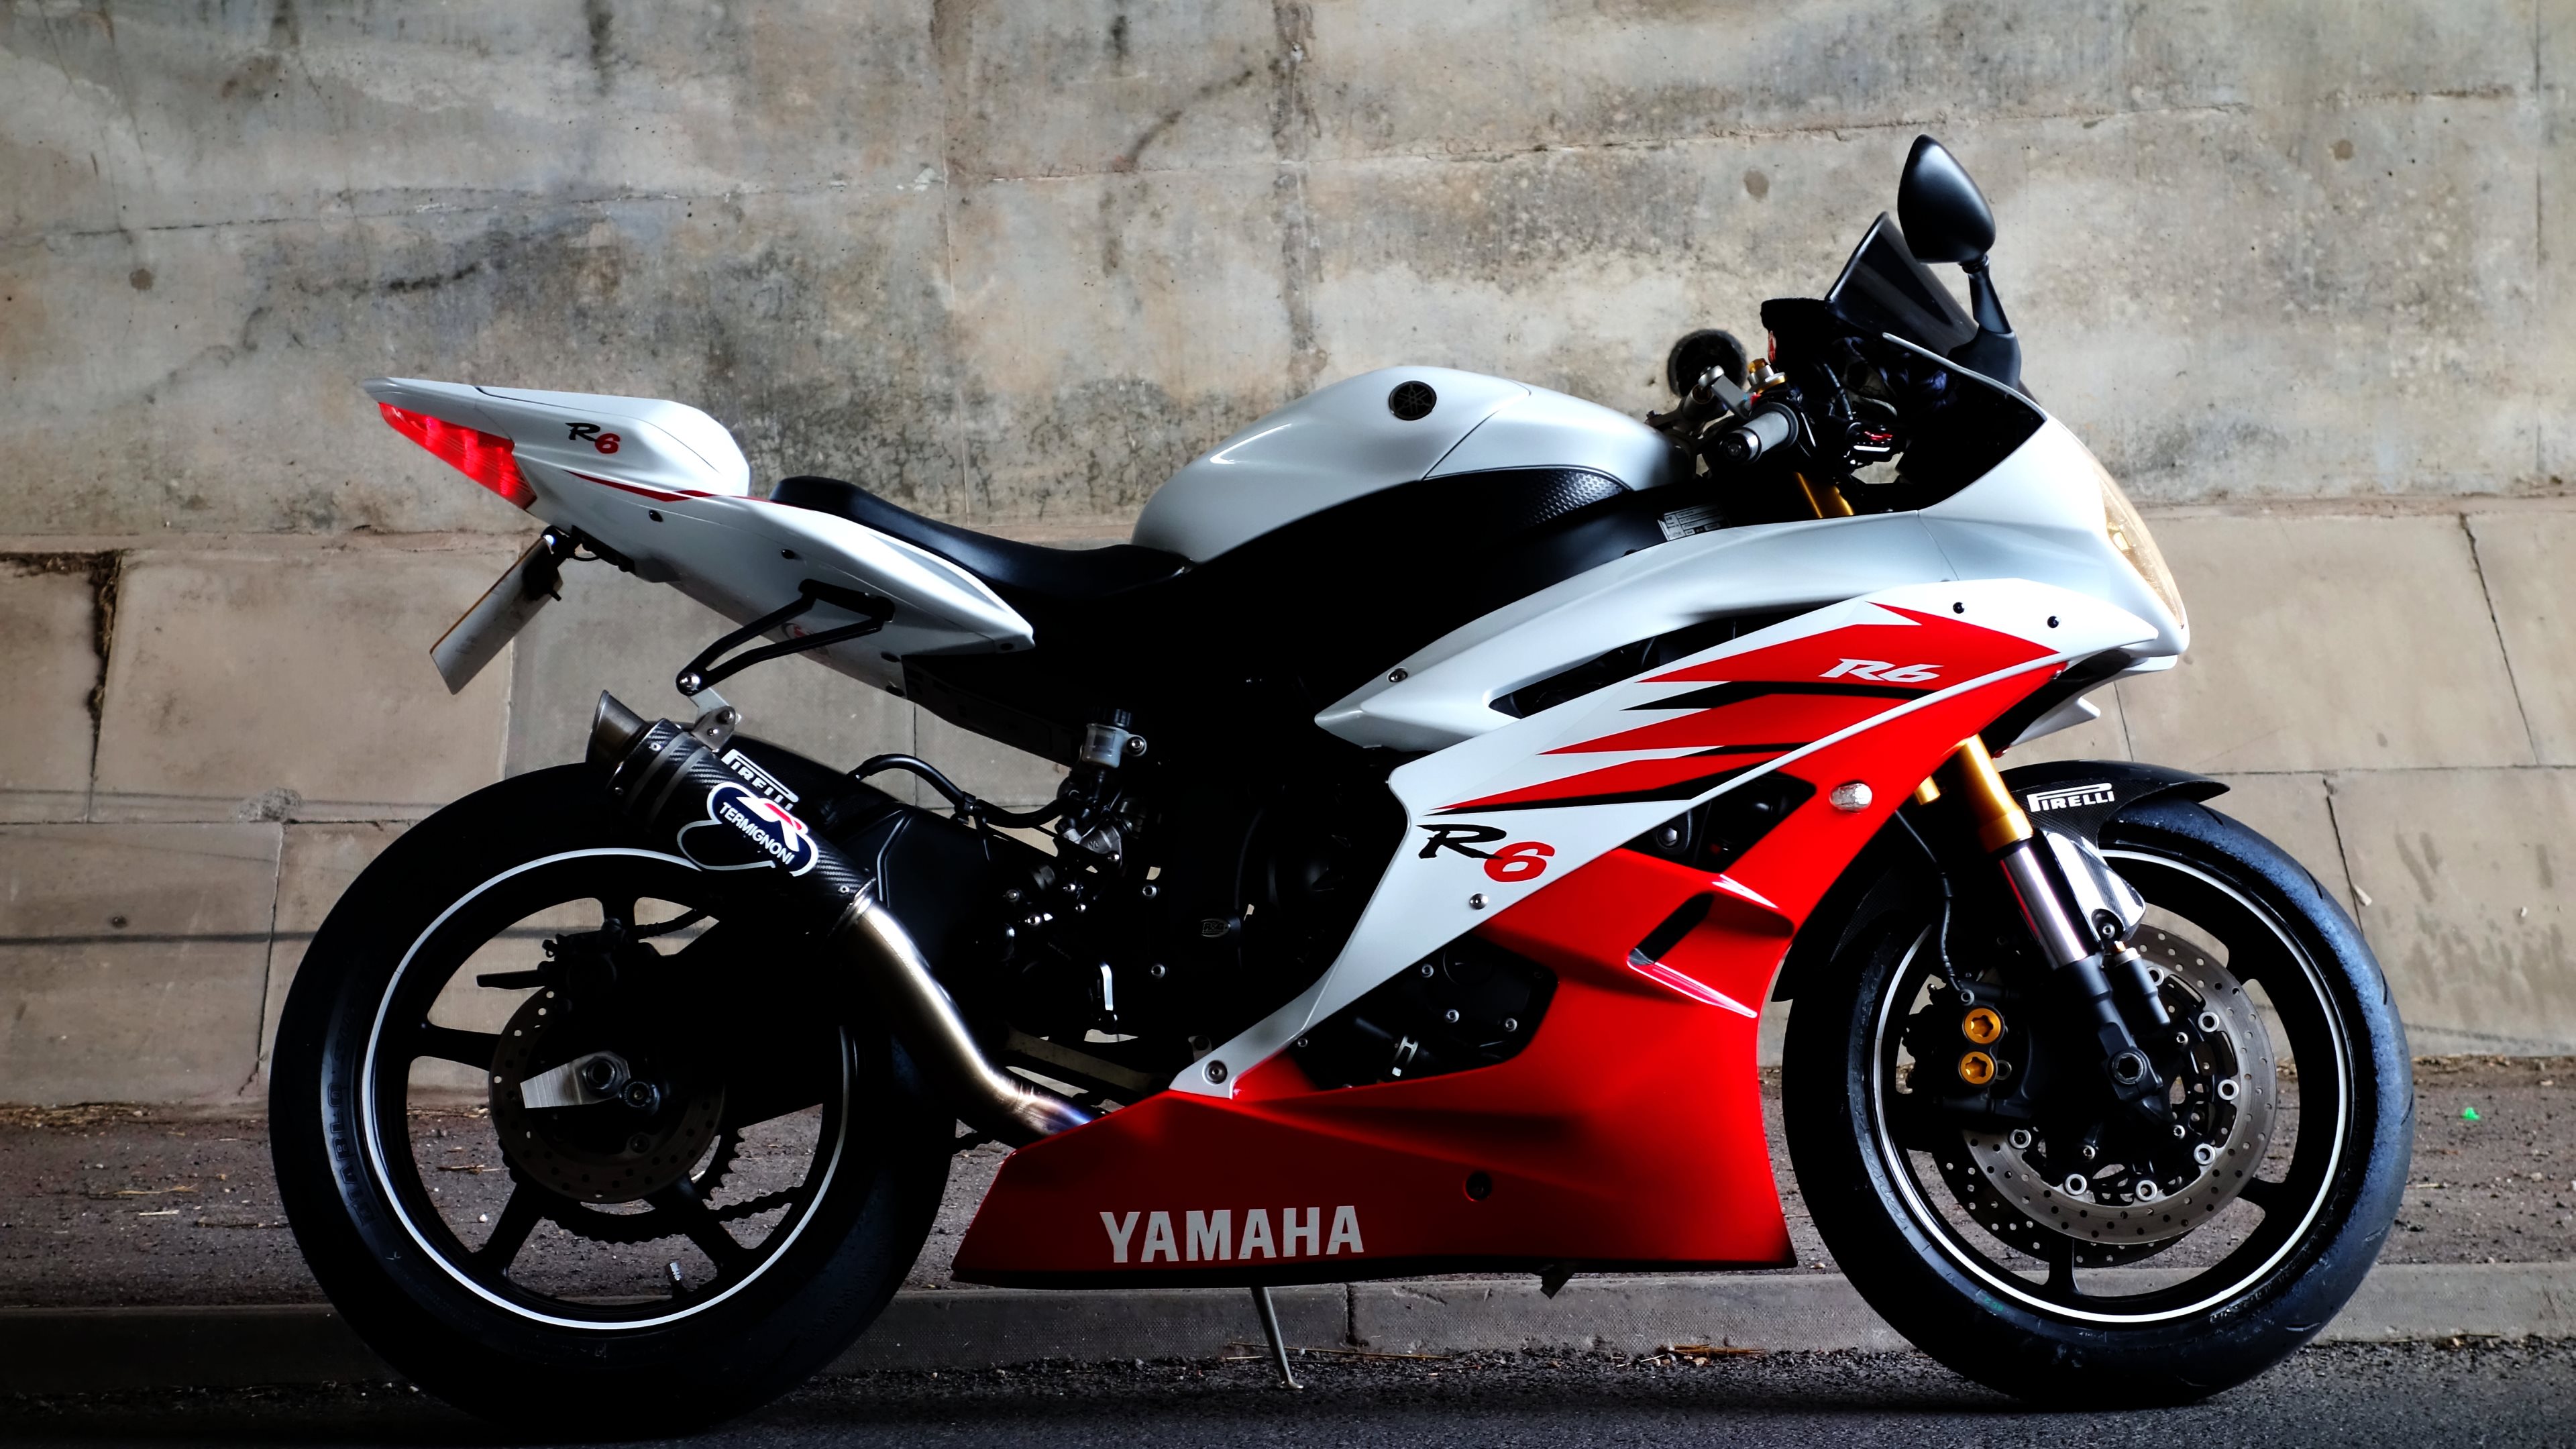 Yamaha R6 carbon for iPad: 2048x2048 (compatible with any iPad screen)